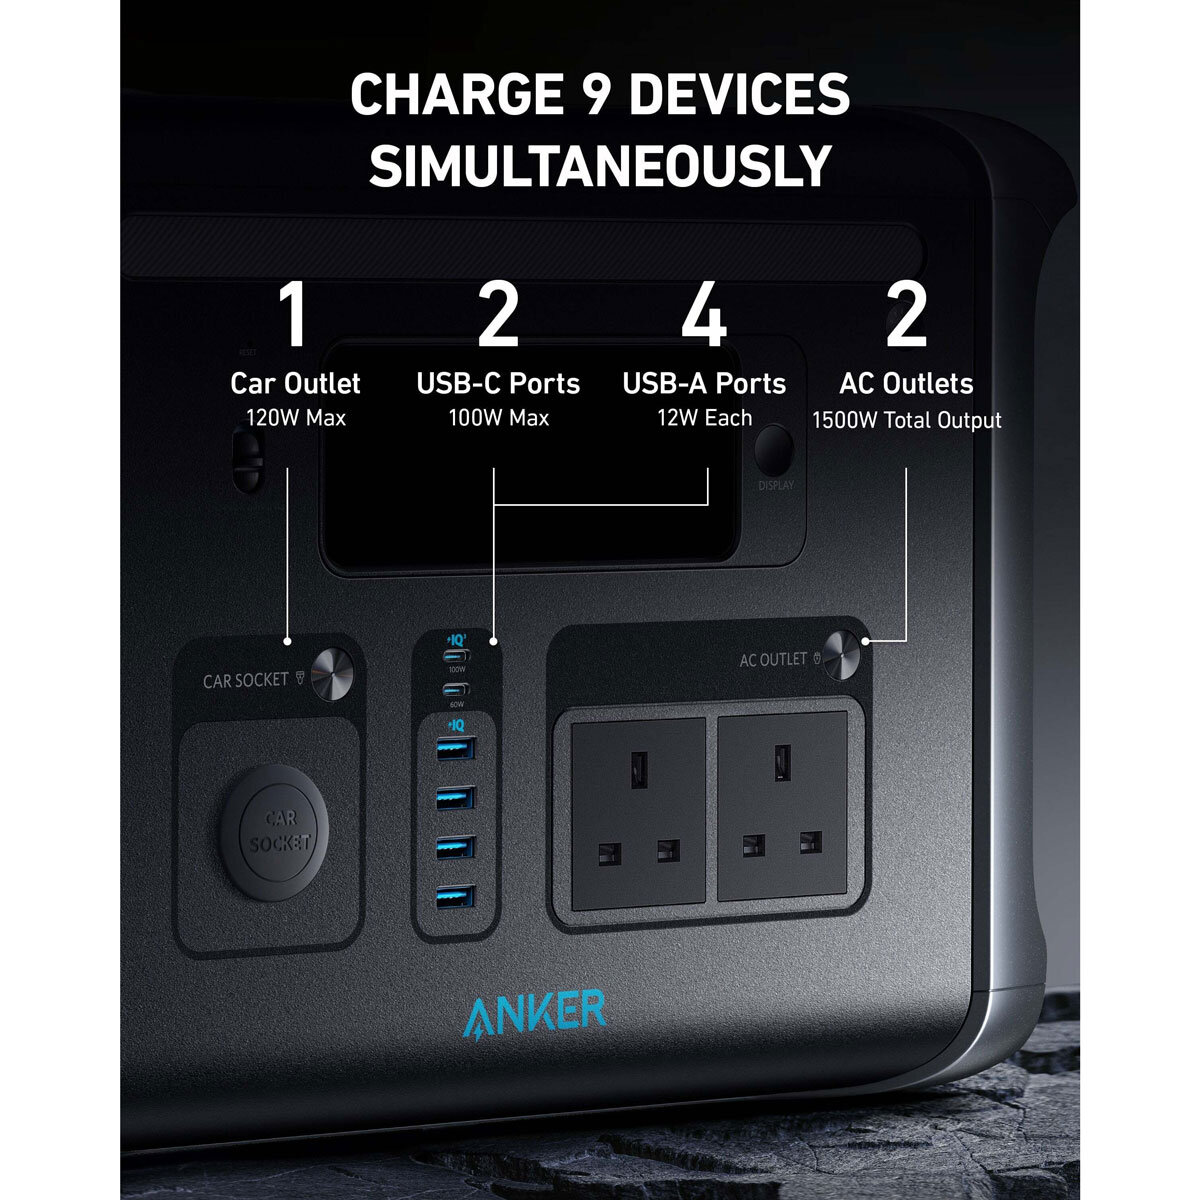 Lifestyle image showing devices that can be charged